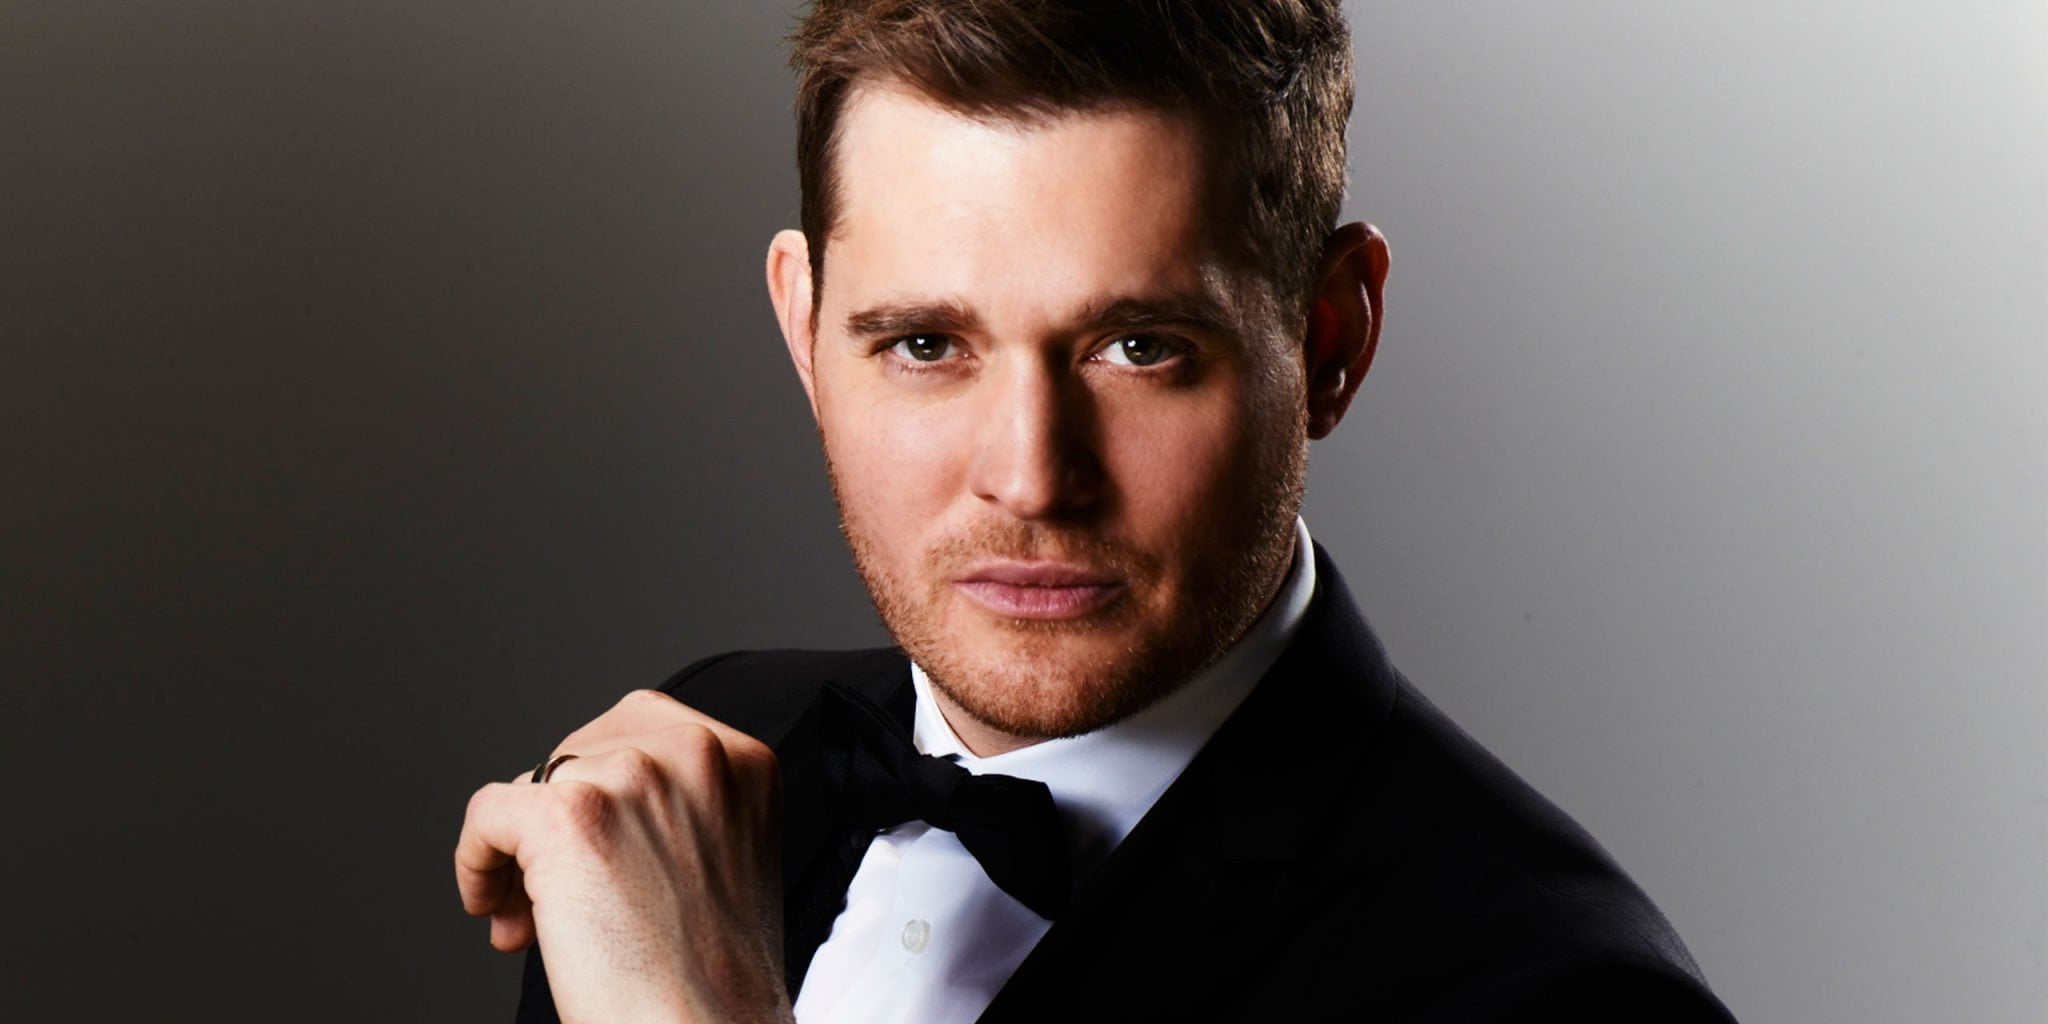 Michael Bublé to Return After Son’s Illness b**p